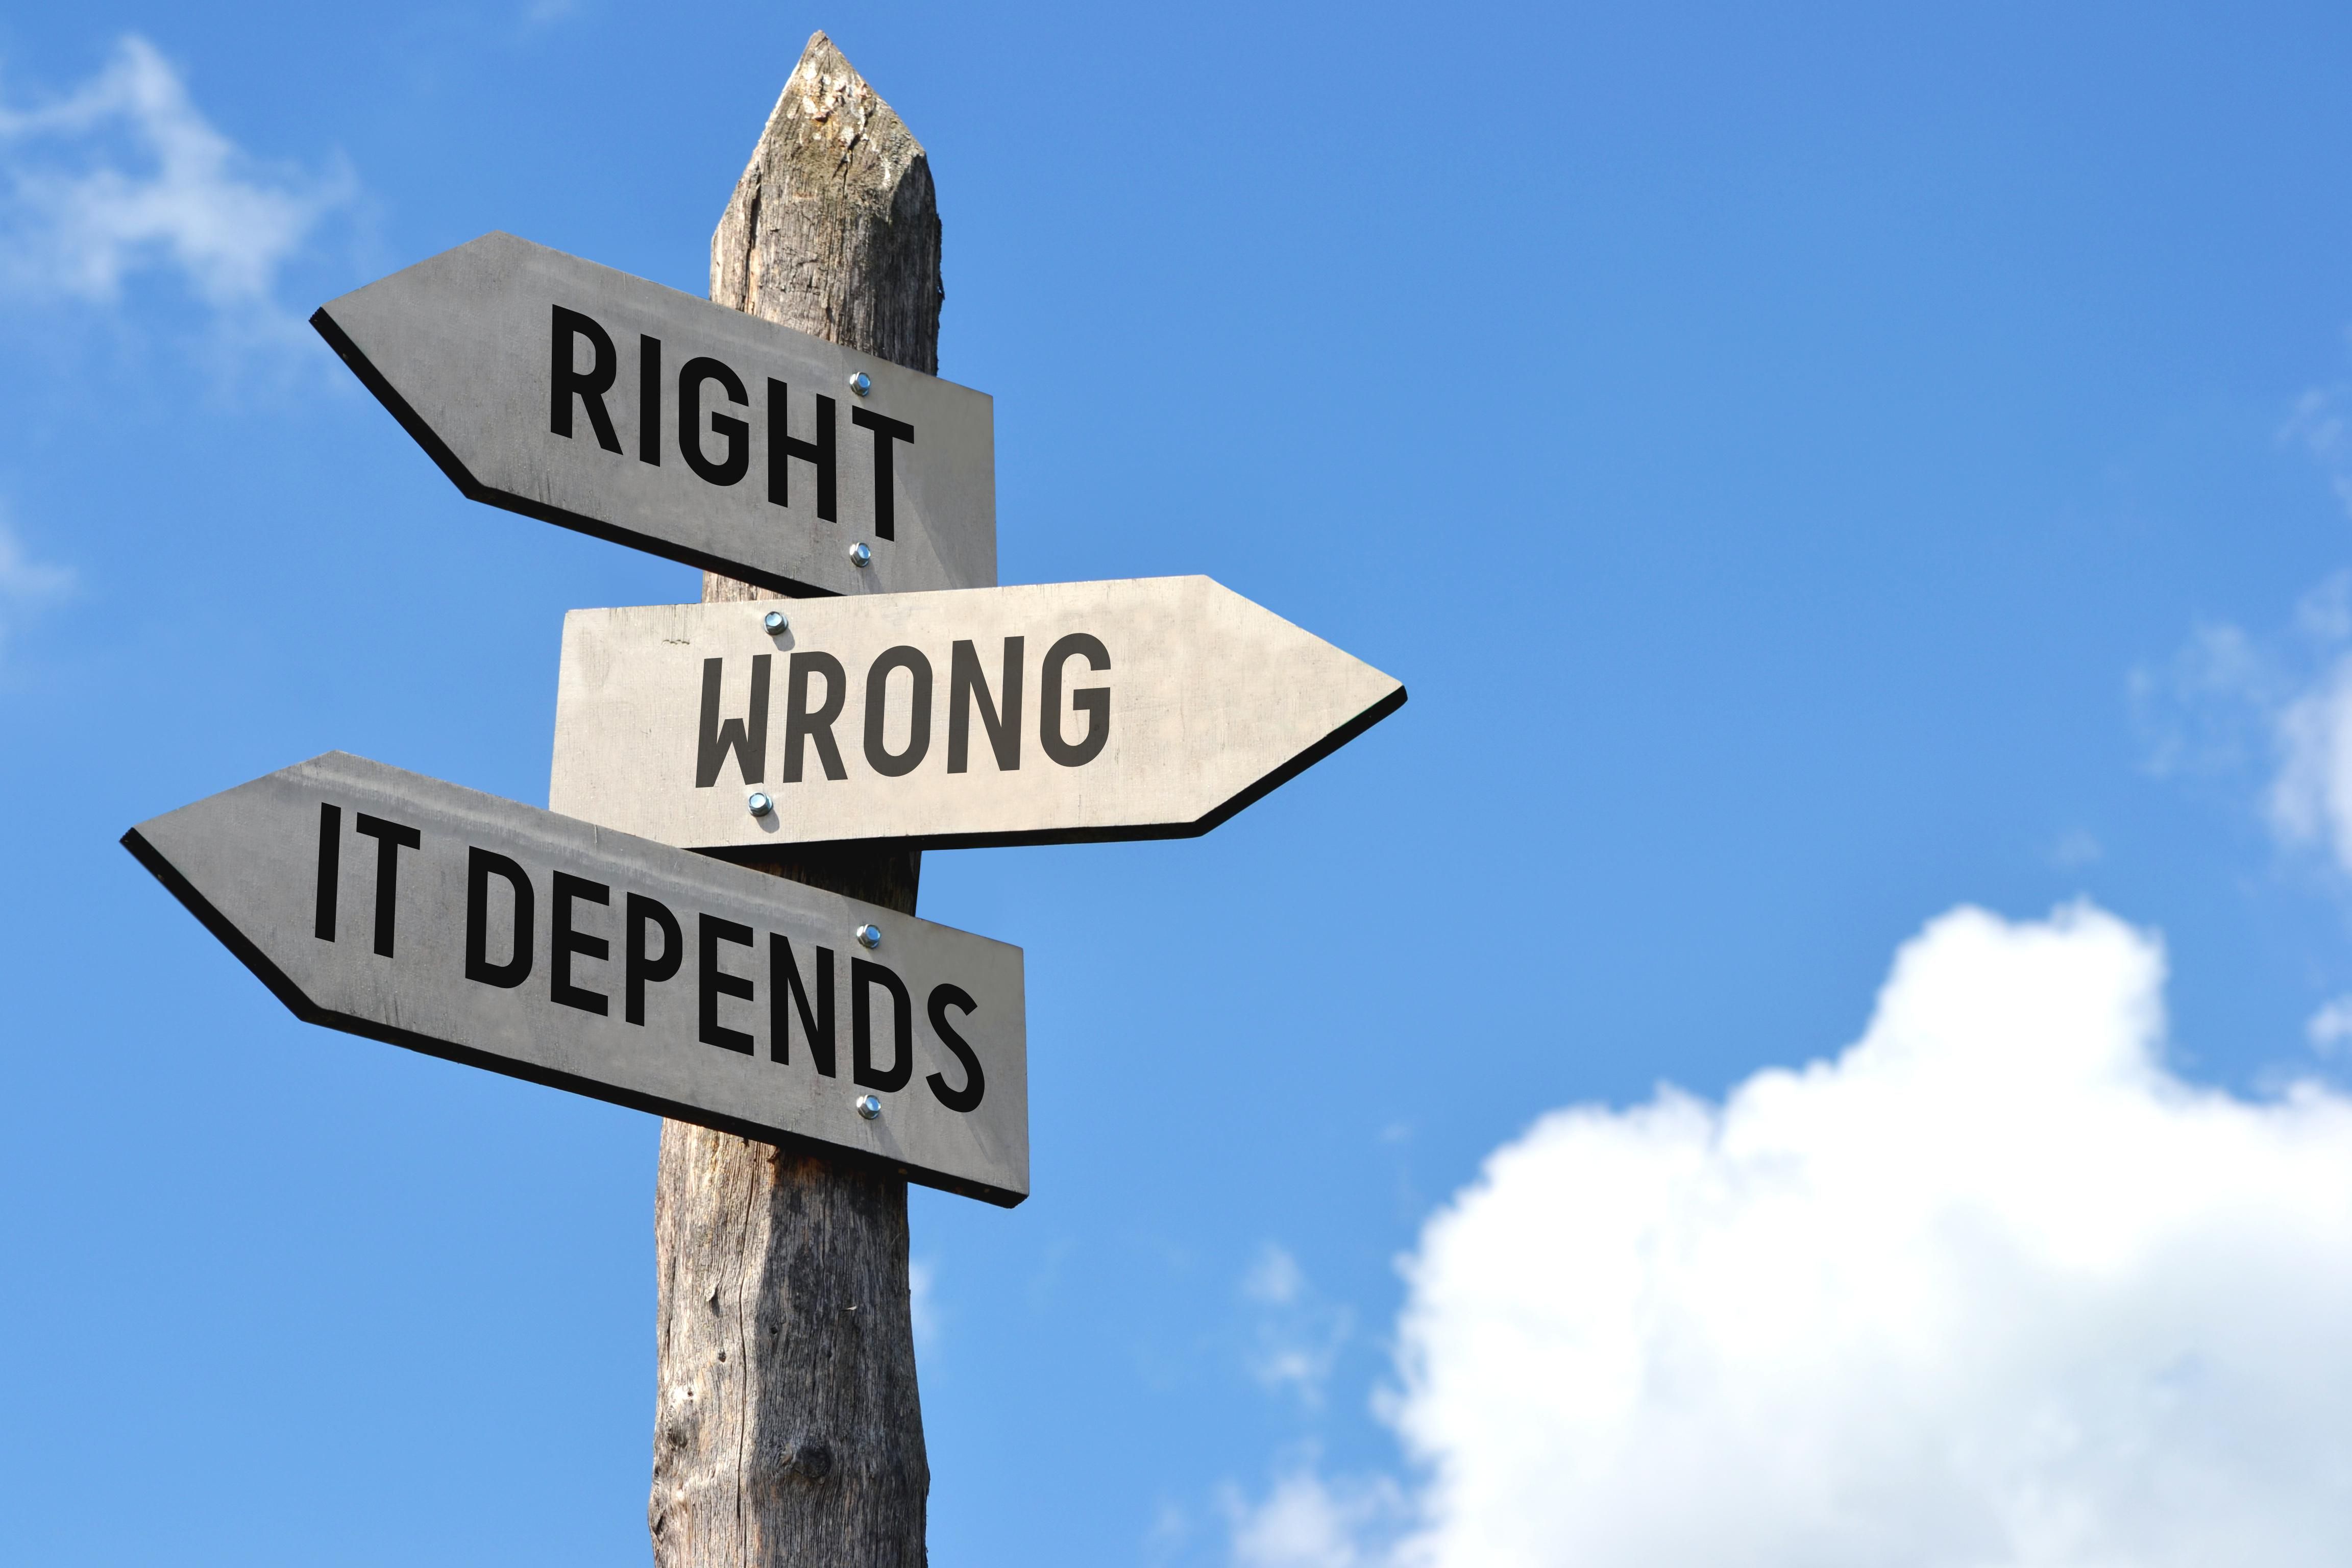 sign post with arrows pointing to "right," "wrong" and "it depends"